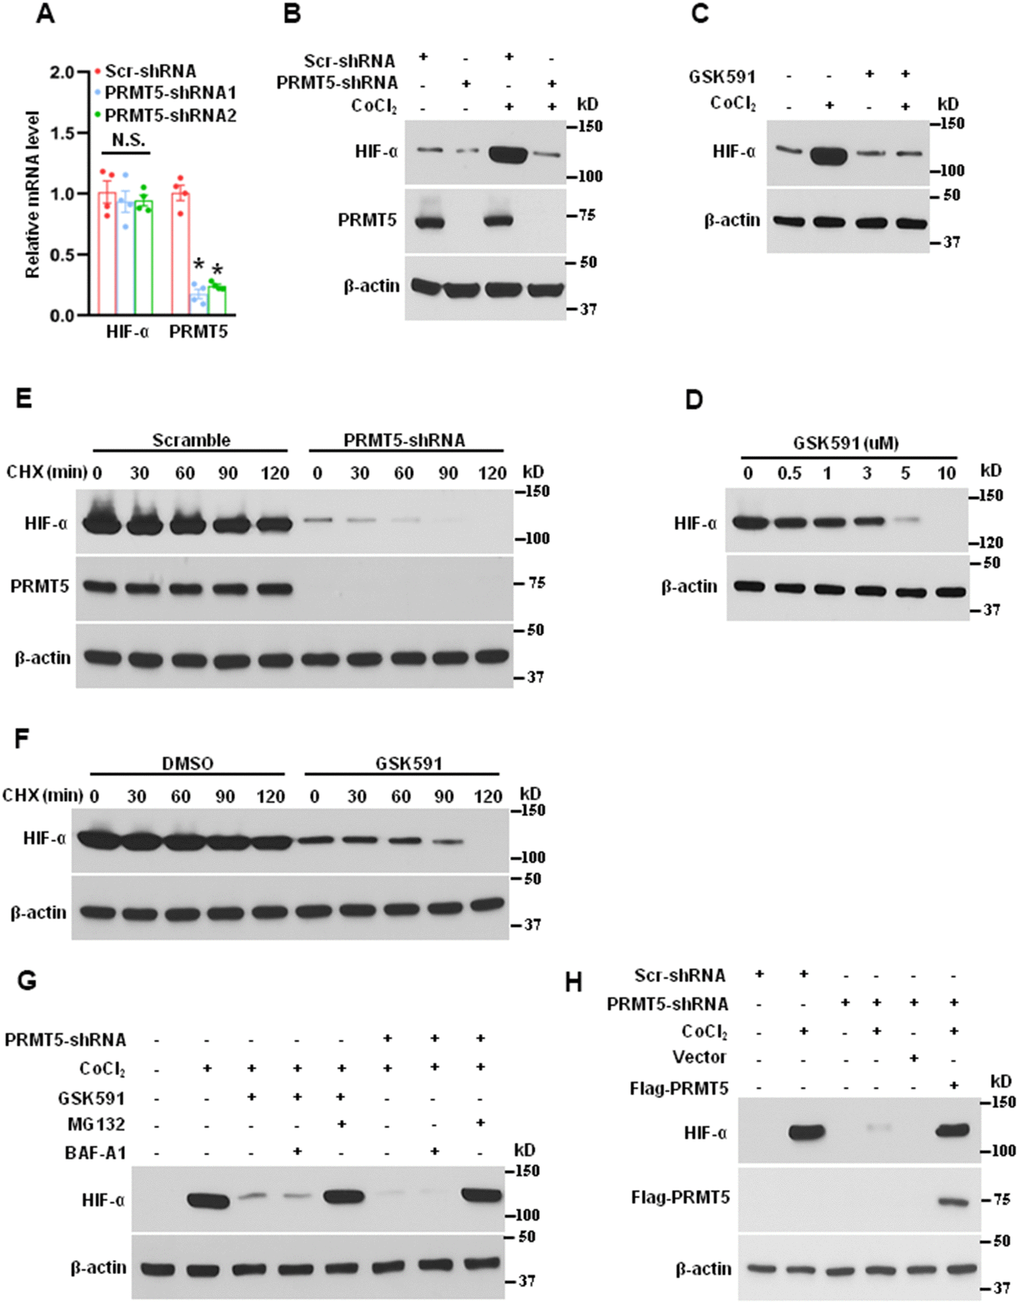 Suppressing PRMT5 reduces the expression and stability of HIF-1α induced by hypoxia. (A) The mRNA expression of HIF-1α and PRMT5 was measured by qRT-PCR in PRMT5 depletion cells (HUVECs, n=4). *P B) The HUVECs were infected with lentivirus containing scramble-shRNA or PRMT5-shRNA2, followed by CoCl2 (200μM) treatment for 24h. The PRMT5 and HIF-α expression levels were determined by Western blotting (n=3). (C) The HUVECs were treated with vehicle or GSK591 (1μM) for five days and then were treated with CoCl2 (200μM) for 24h. The HIF-1α expression level was determined by Western blotting (n=3). (D) The effect of different doses of GSK591 on the HIF-1α expression level induced by CoCl2 as evaluated by Western blotting (n=3). (E) The HIF-1α stability was detected by Western blotting in PRMT5 depletion HUVECs upon cycloheximide (CHX, 20μg/mL) treatment at the indicated time points (n=3). (F) The HIF-1α stability was detected by Western blotting in GSK591-treated HUVECs upon cycloheximide treatment at the indicated time points (n=3). (G) The HUVECs were incubated with or without GSK591 (10μM) or infected with lentivirus containing PRMT5-shRNA2 and then pretreated with MG132 (10μM) and BAF-A1 (100nM) for 30 min before treating CoCl2. The HIF-1α expression levels were evaluated by Western blotting (n=3). (H) The HUVECs were infected with lentivirus containing scramble-shRNA or PRMT5-shRNA2 and then were transfected with vector or Flag-PRMT5 before treating CoCl2. The HIF-1α expression levels were evaluated by Western blotting (n=3).